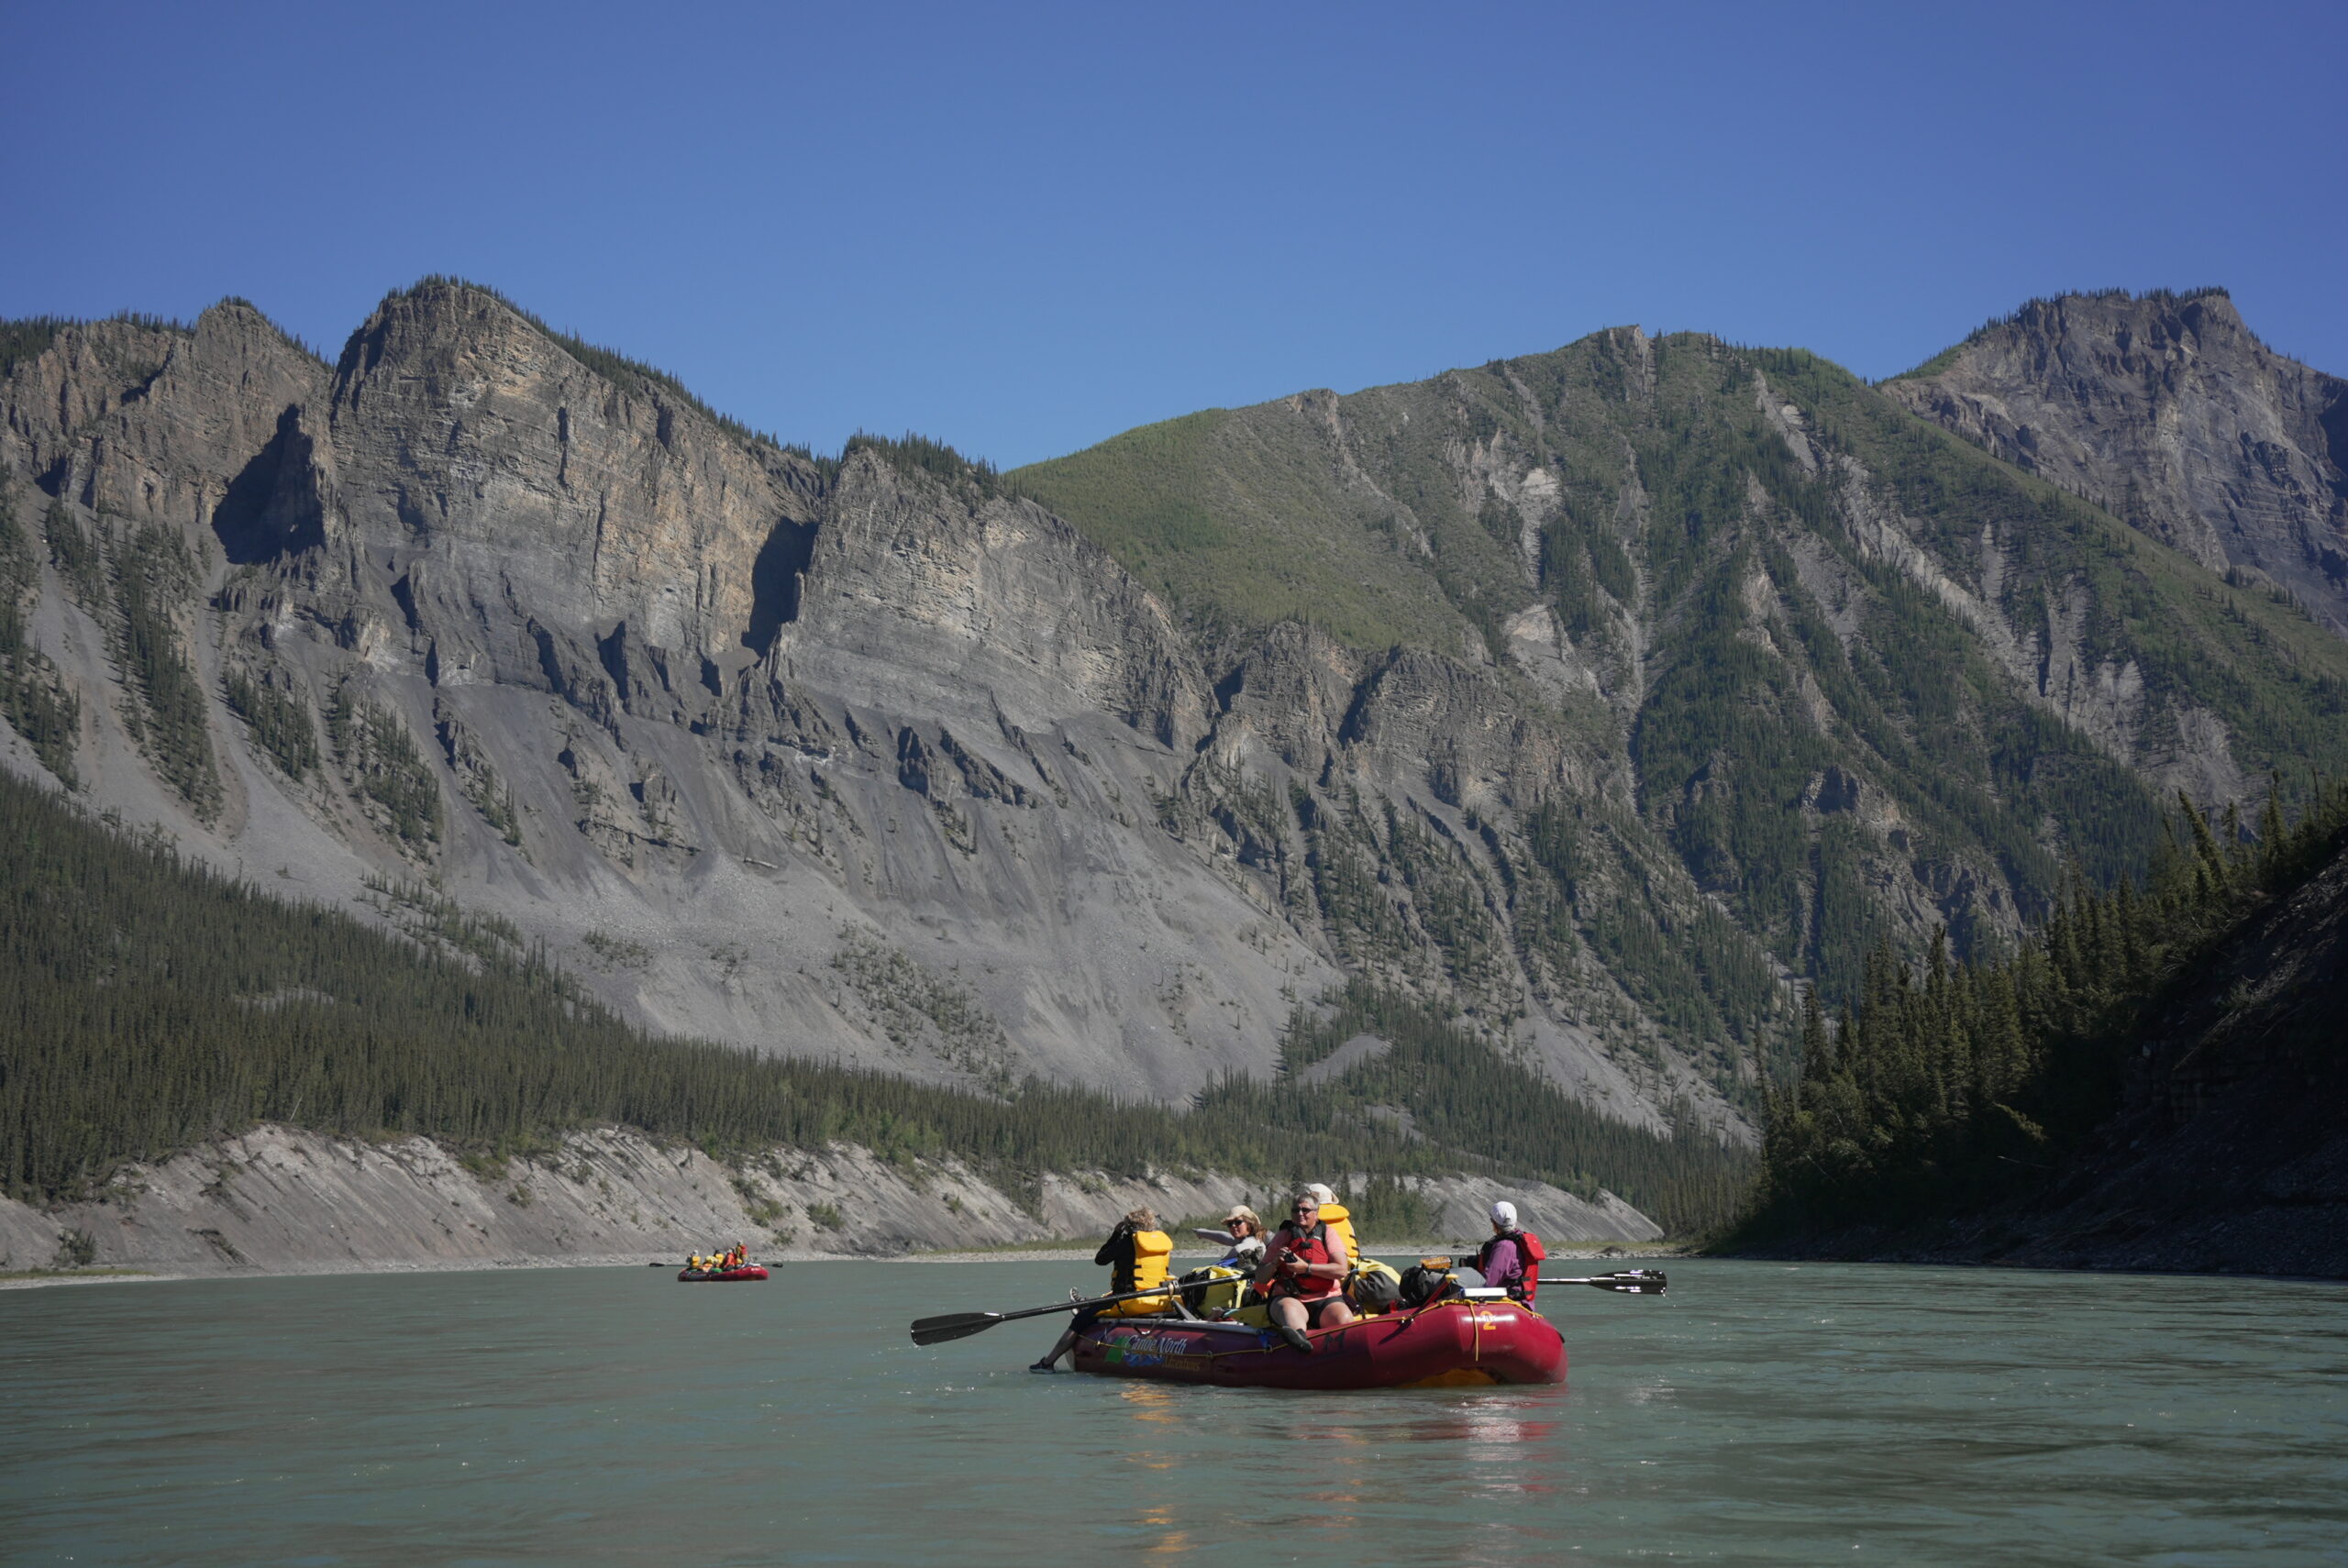 Rafting on the Nahanni River